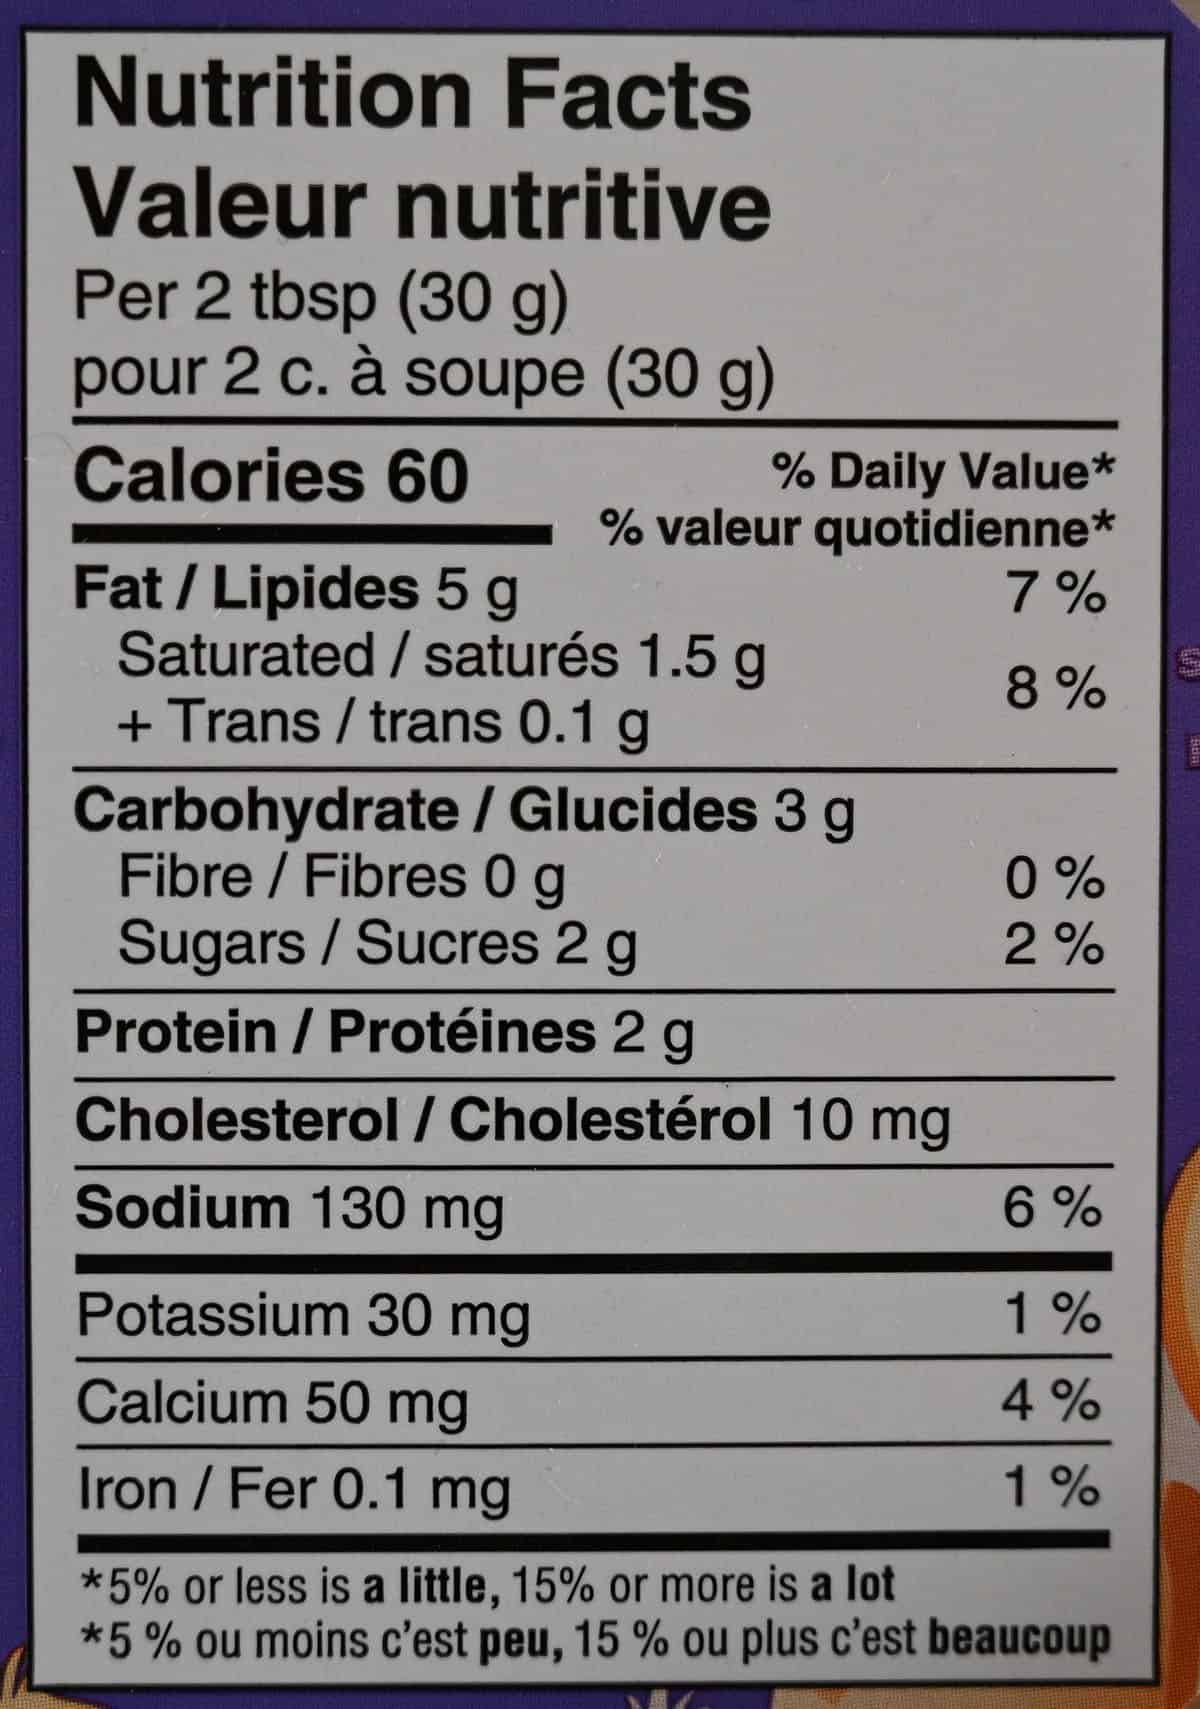 Costco Good Foods Caramelized Onion & Gruyere Cheese Dip Nutrition Facts label.